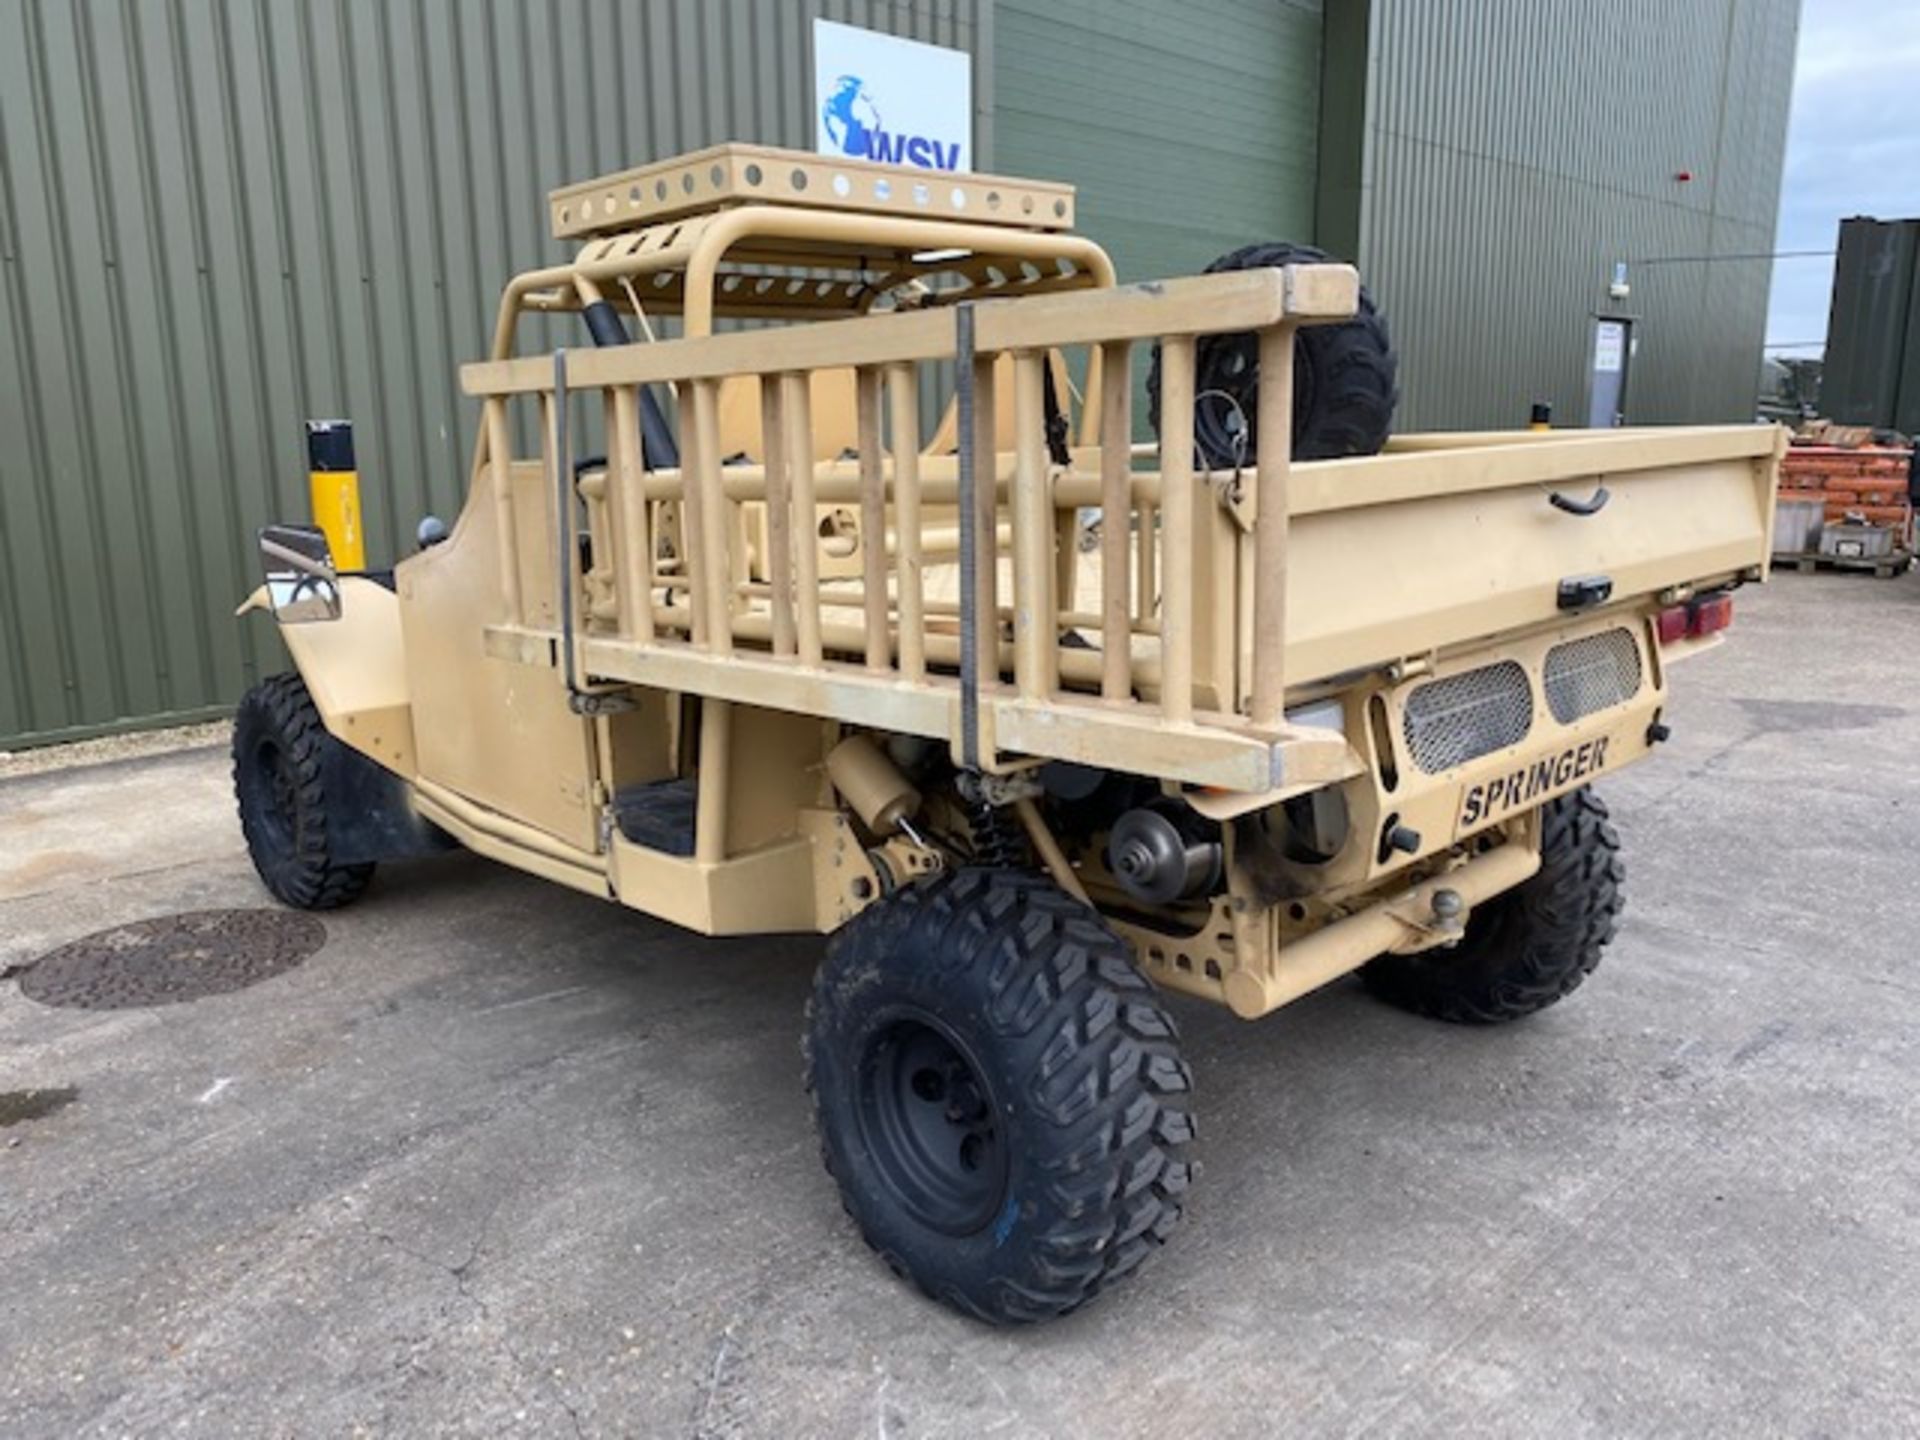 Enhanced Protection Systems (EPS) Springer ATV Only 717 Kms ex Reserve MOD - Image 34 of 42